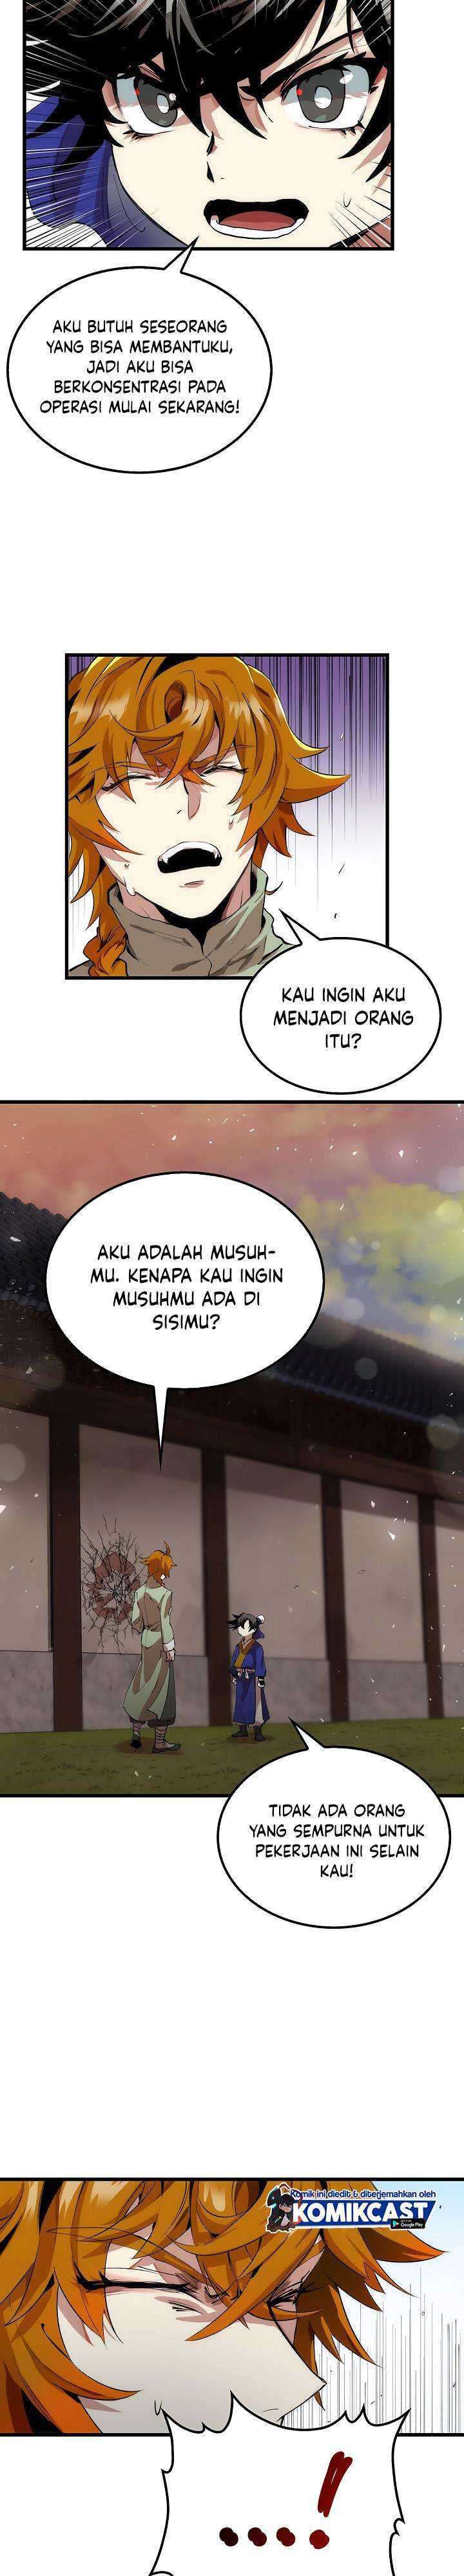 Doctor’s Rebirth Chapter 31